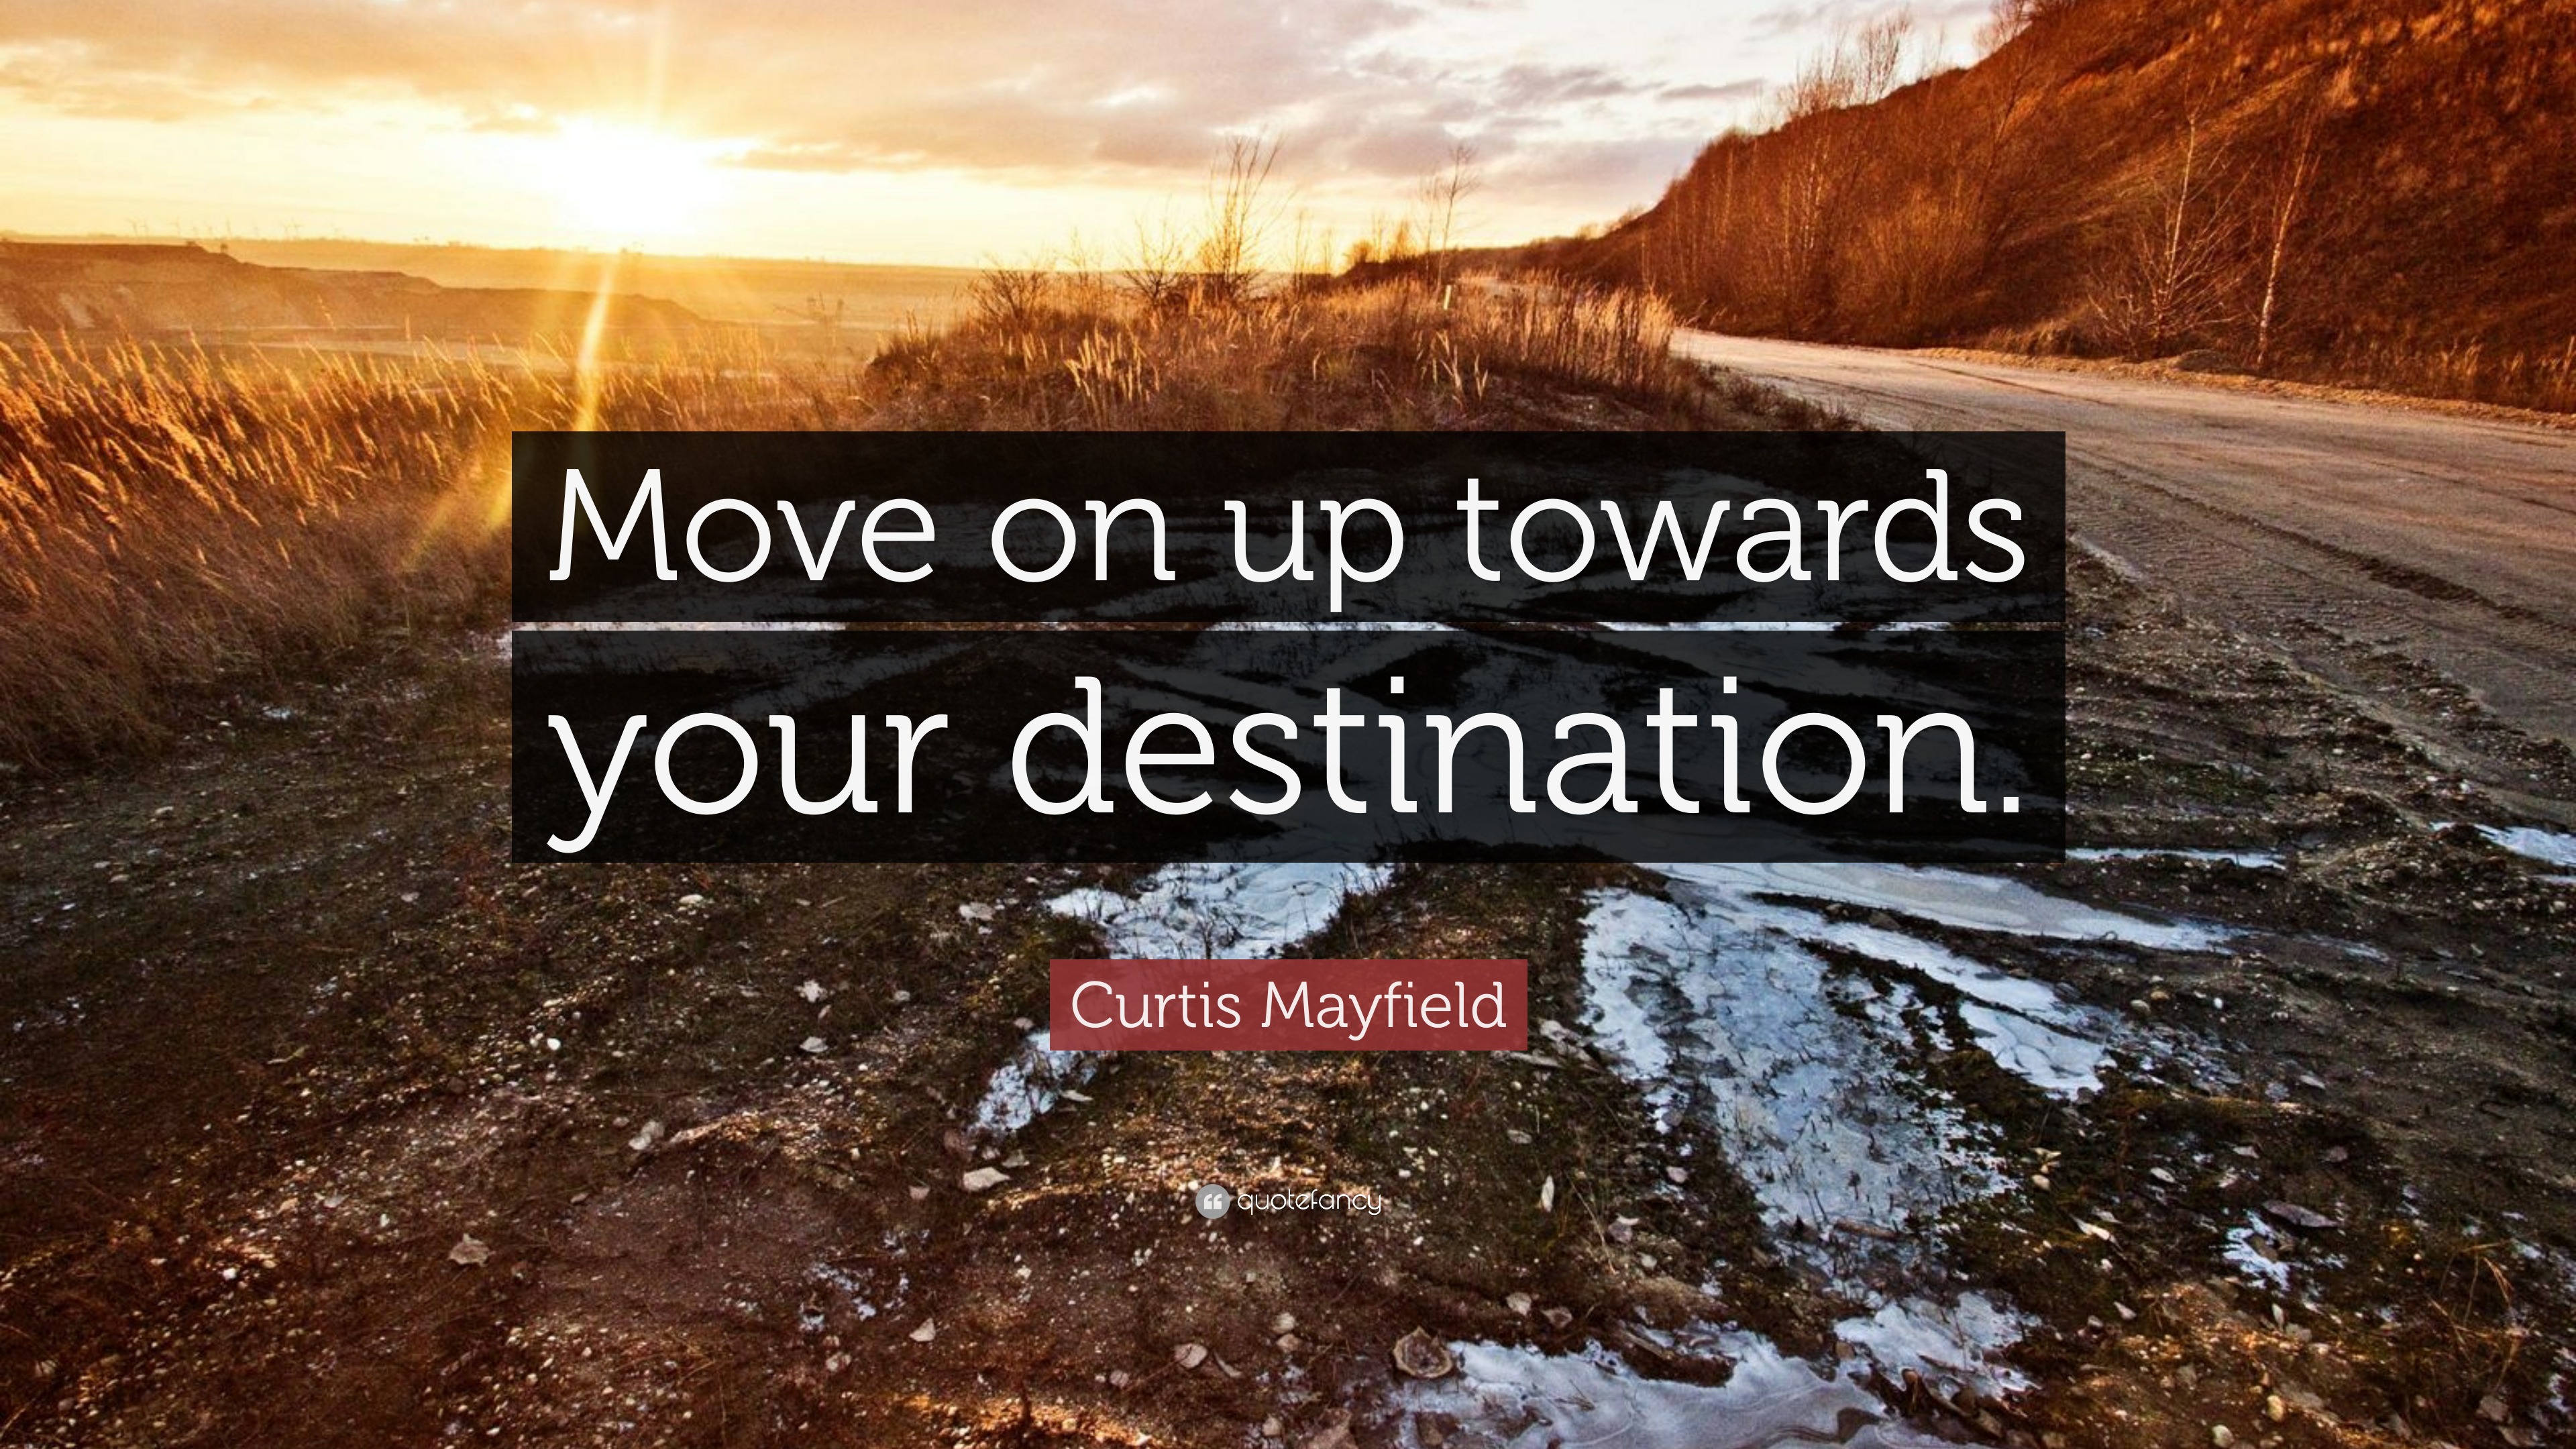 Curtis Mayfield Quote: “Move on up towards your destination.”